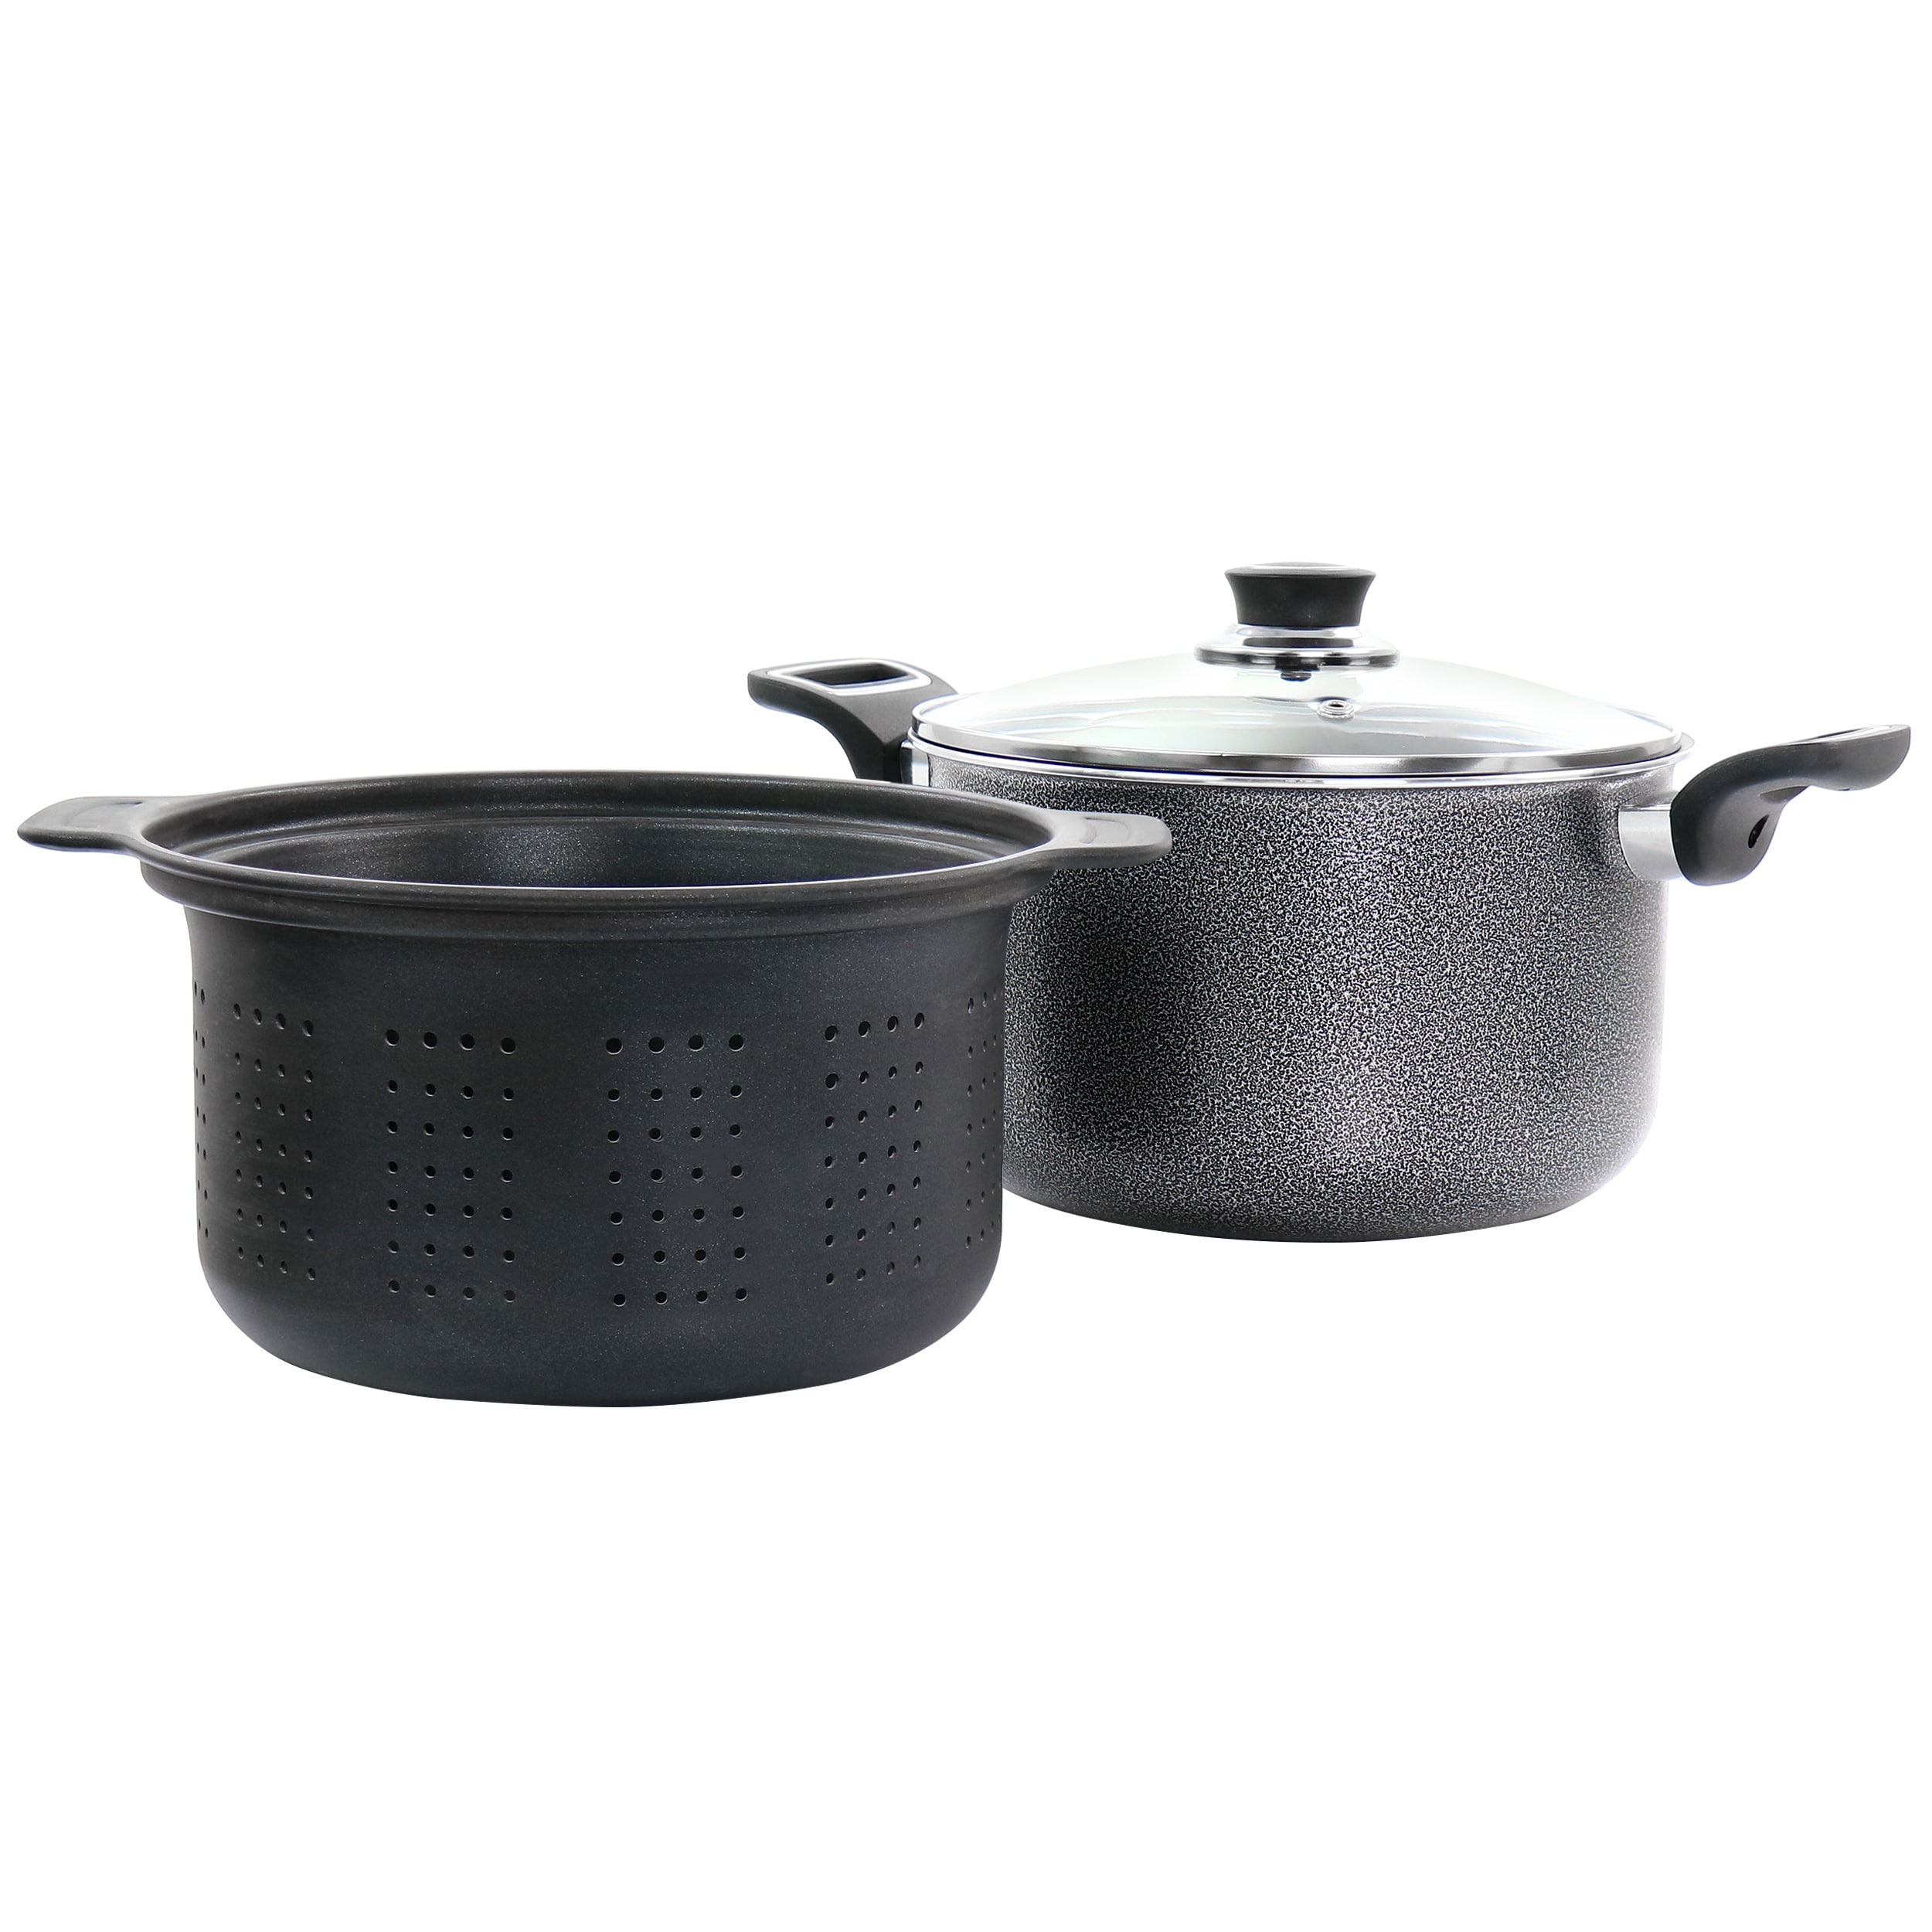 Oster 4 qt. Round Dutch Oven with Lid